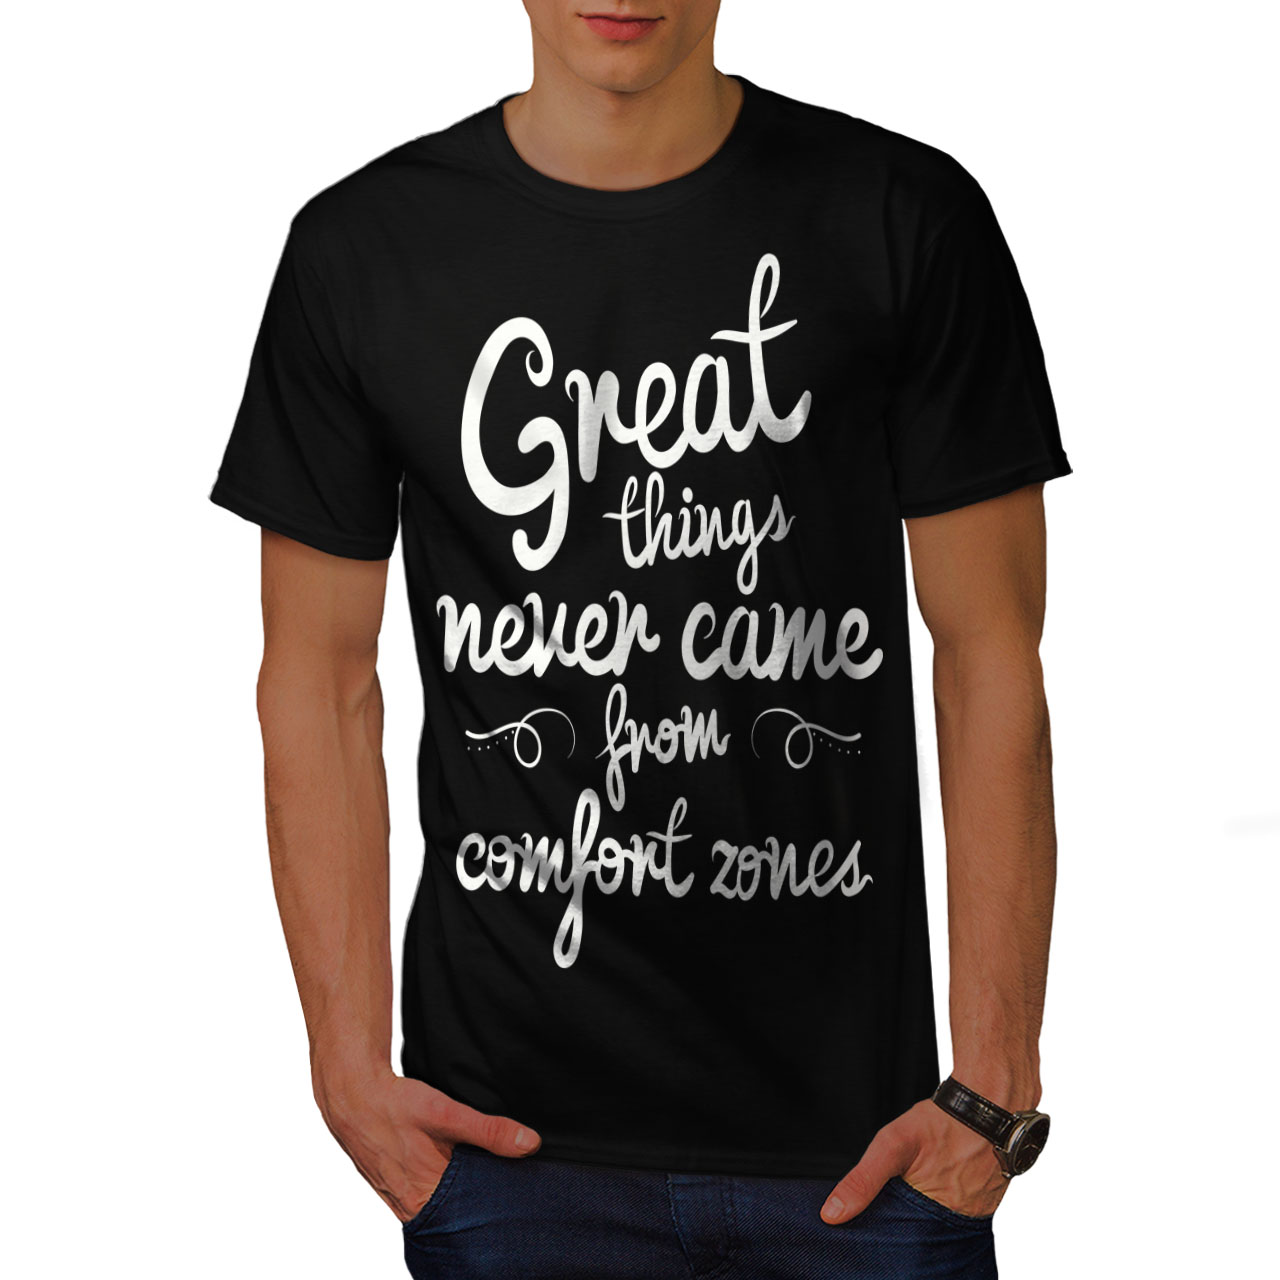 Inspiration Graphic Design Printed Tee Details about   Wellcoda Comfort Zones Mens T-shirt